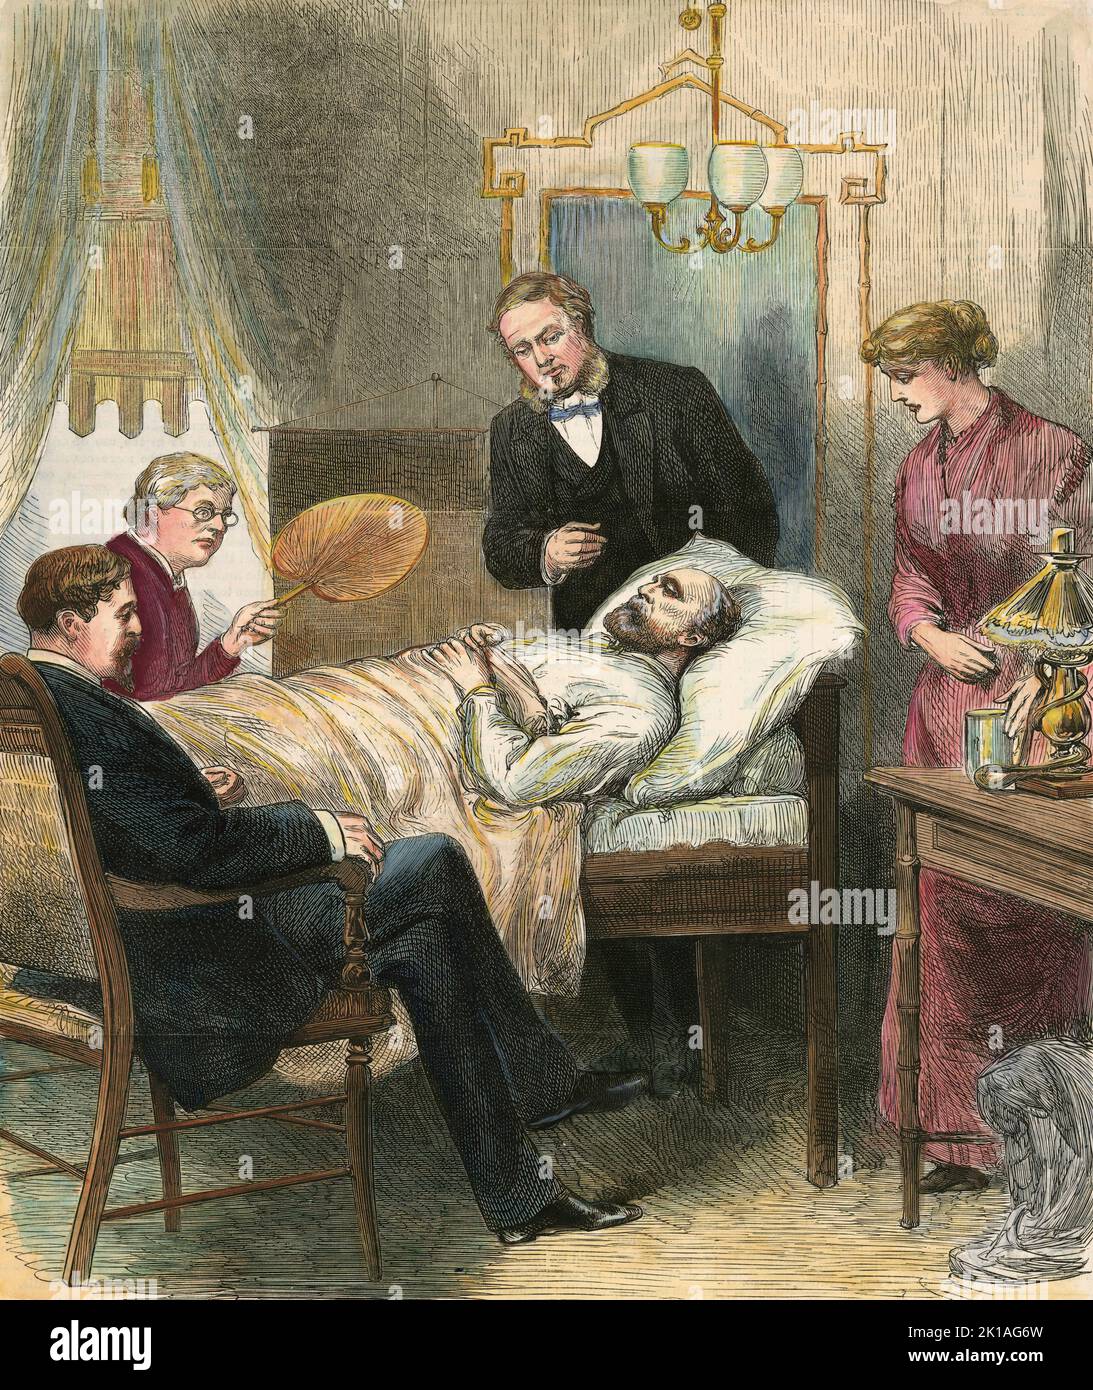 President James Garfield lying wounded in his bed after the assassination attempt by Charles Guiteauon July 2nd 1881. Garfield was not killed by the bullet but died, probably from sepsis, two months later on September 19th 1881. Stock Photo